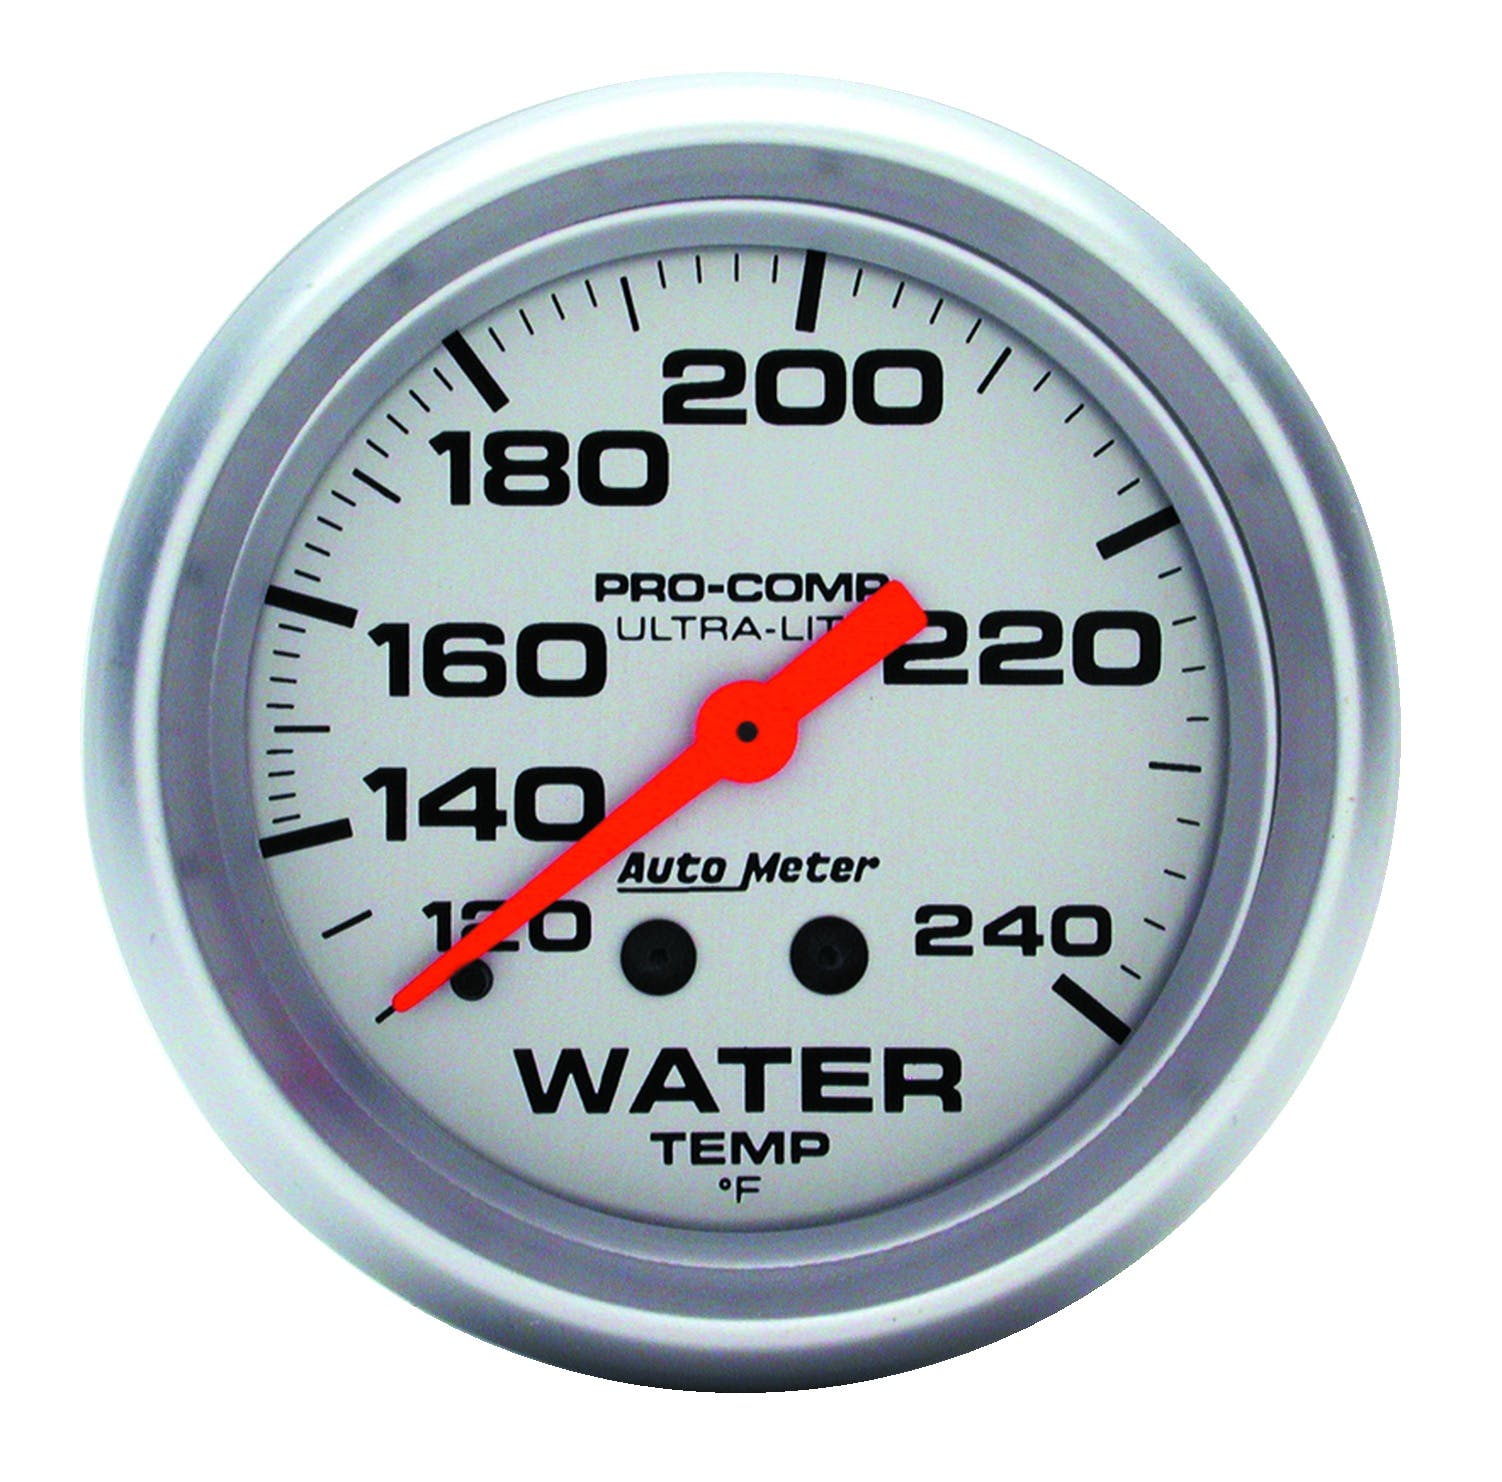 AutoMeter Products 4433 Water Temp 120-240 F